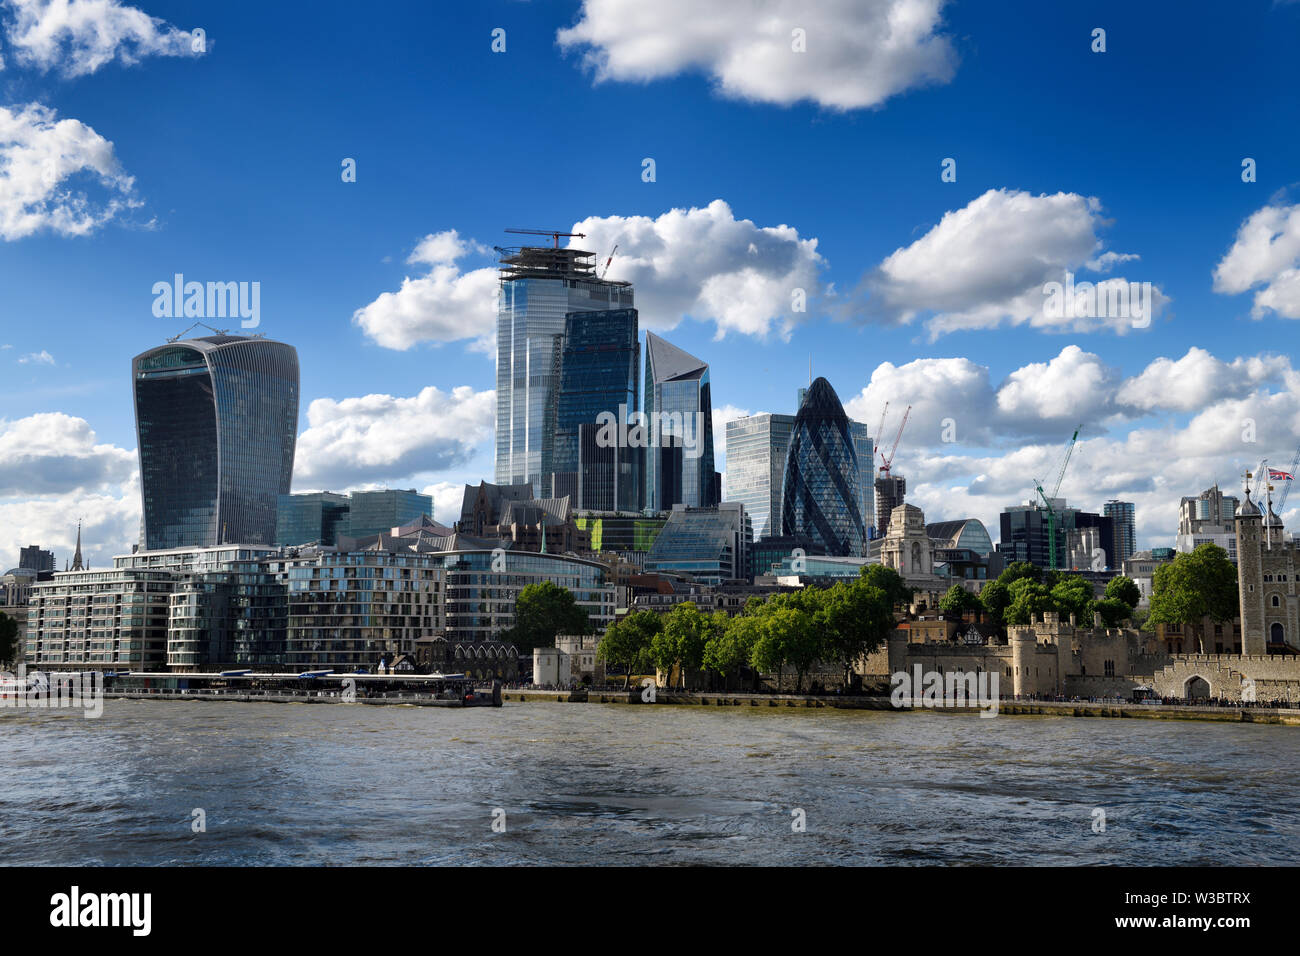 Tower Pier and Tower of London on the River Thames and financial district skyscrapers Walkie Talkie Cheesegrater Scalpel Gherkin London England Stock Photo